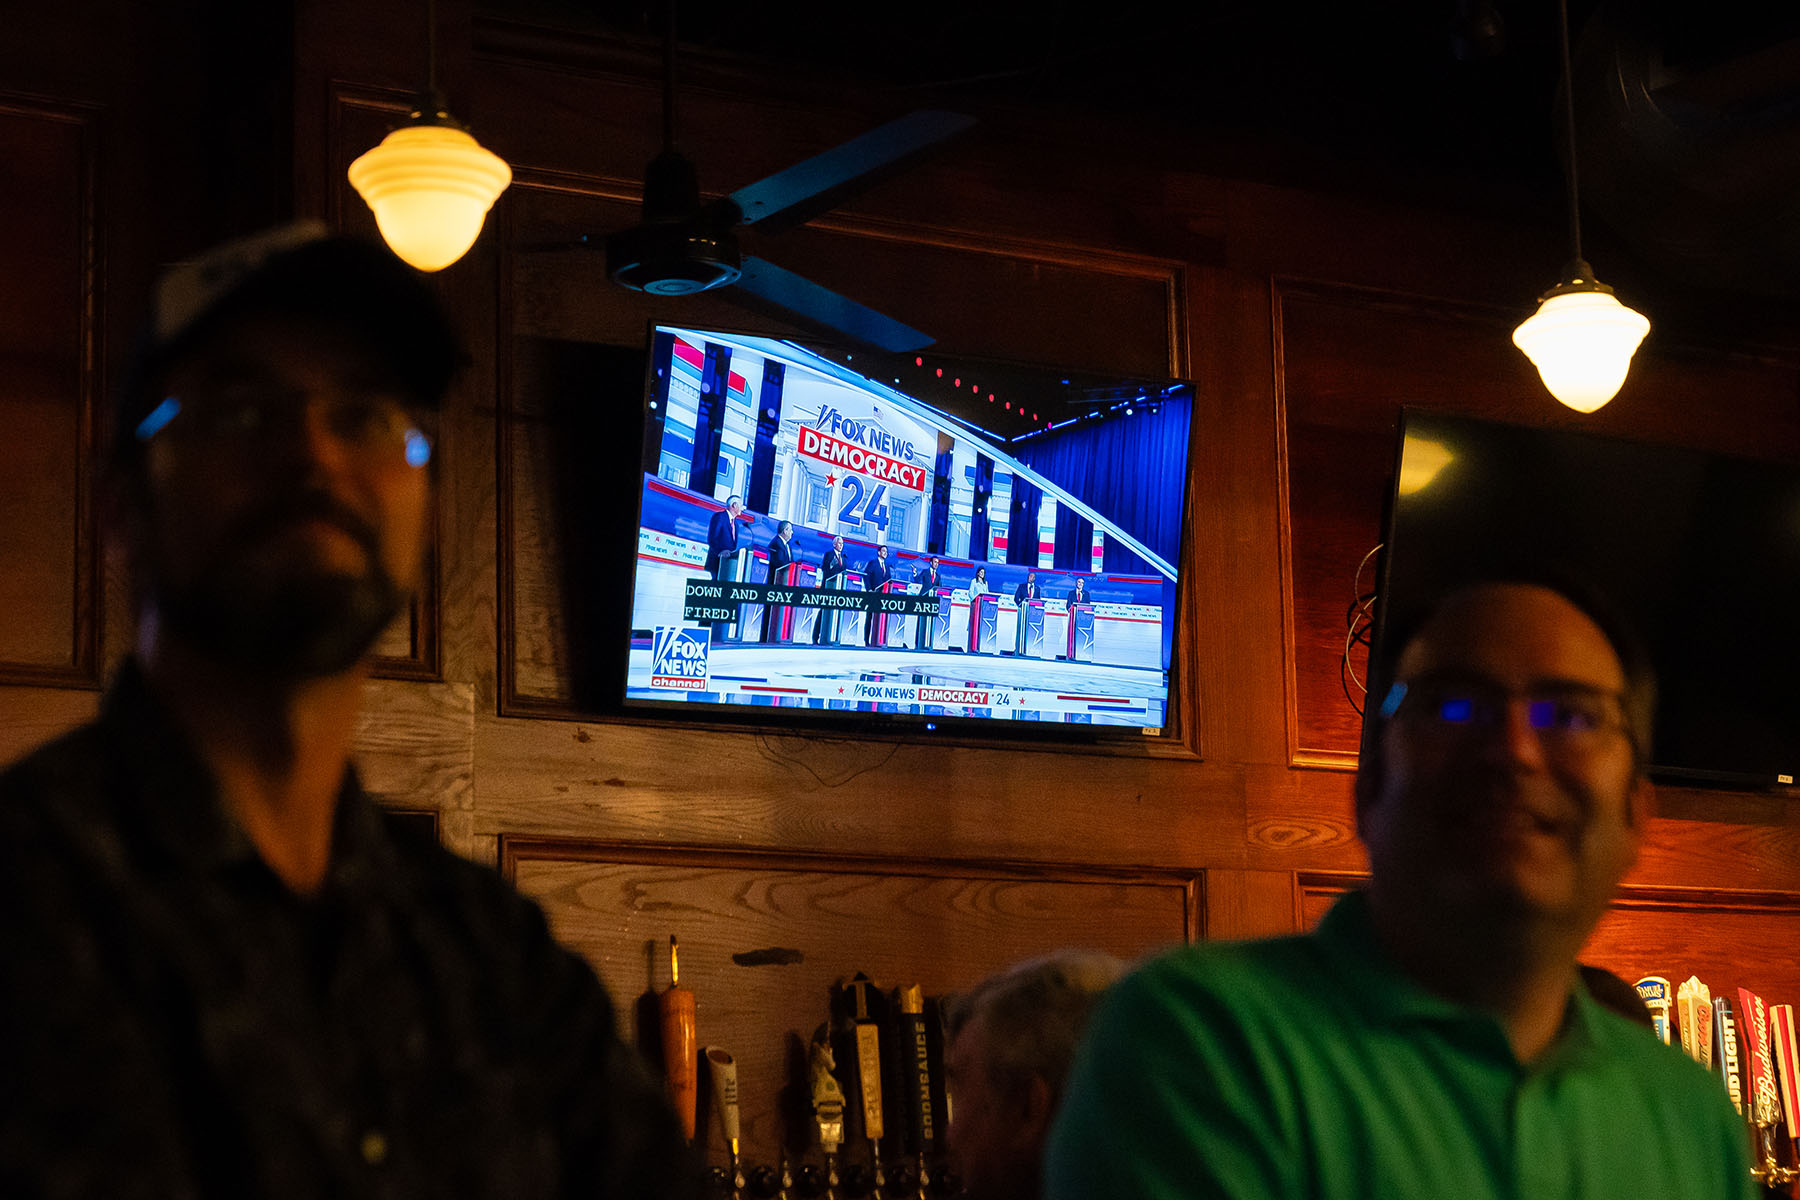 The Republican Presidential Primary debate plays on a TV screen at a bar.